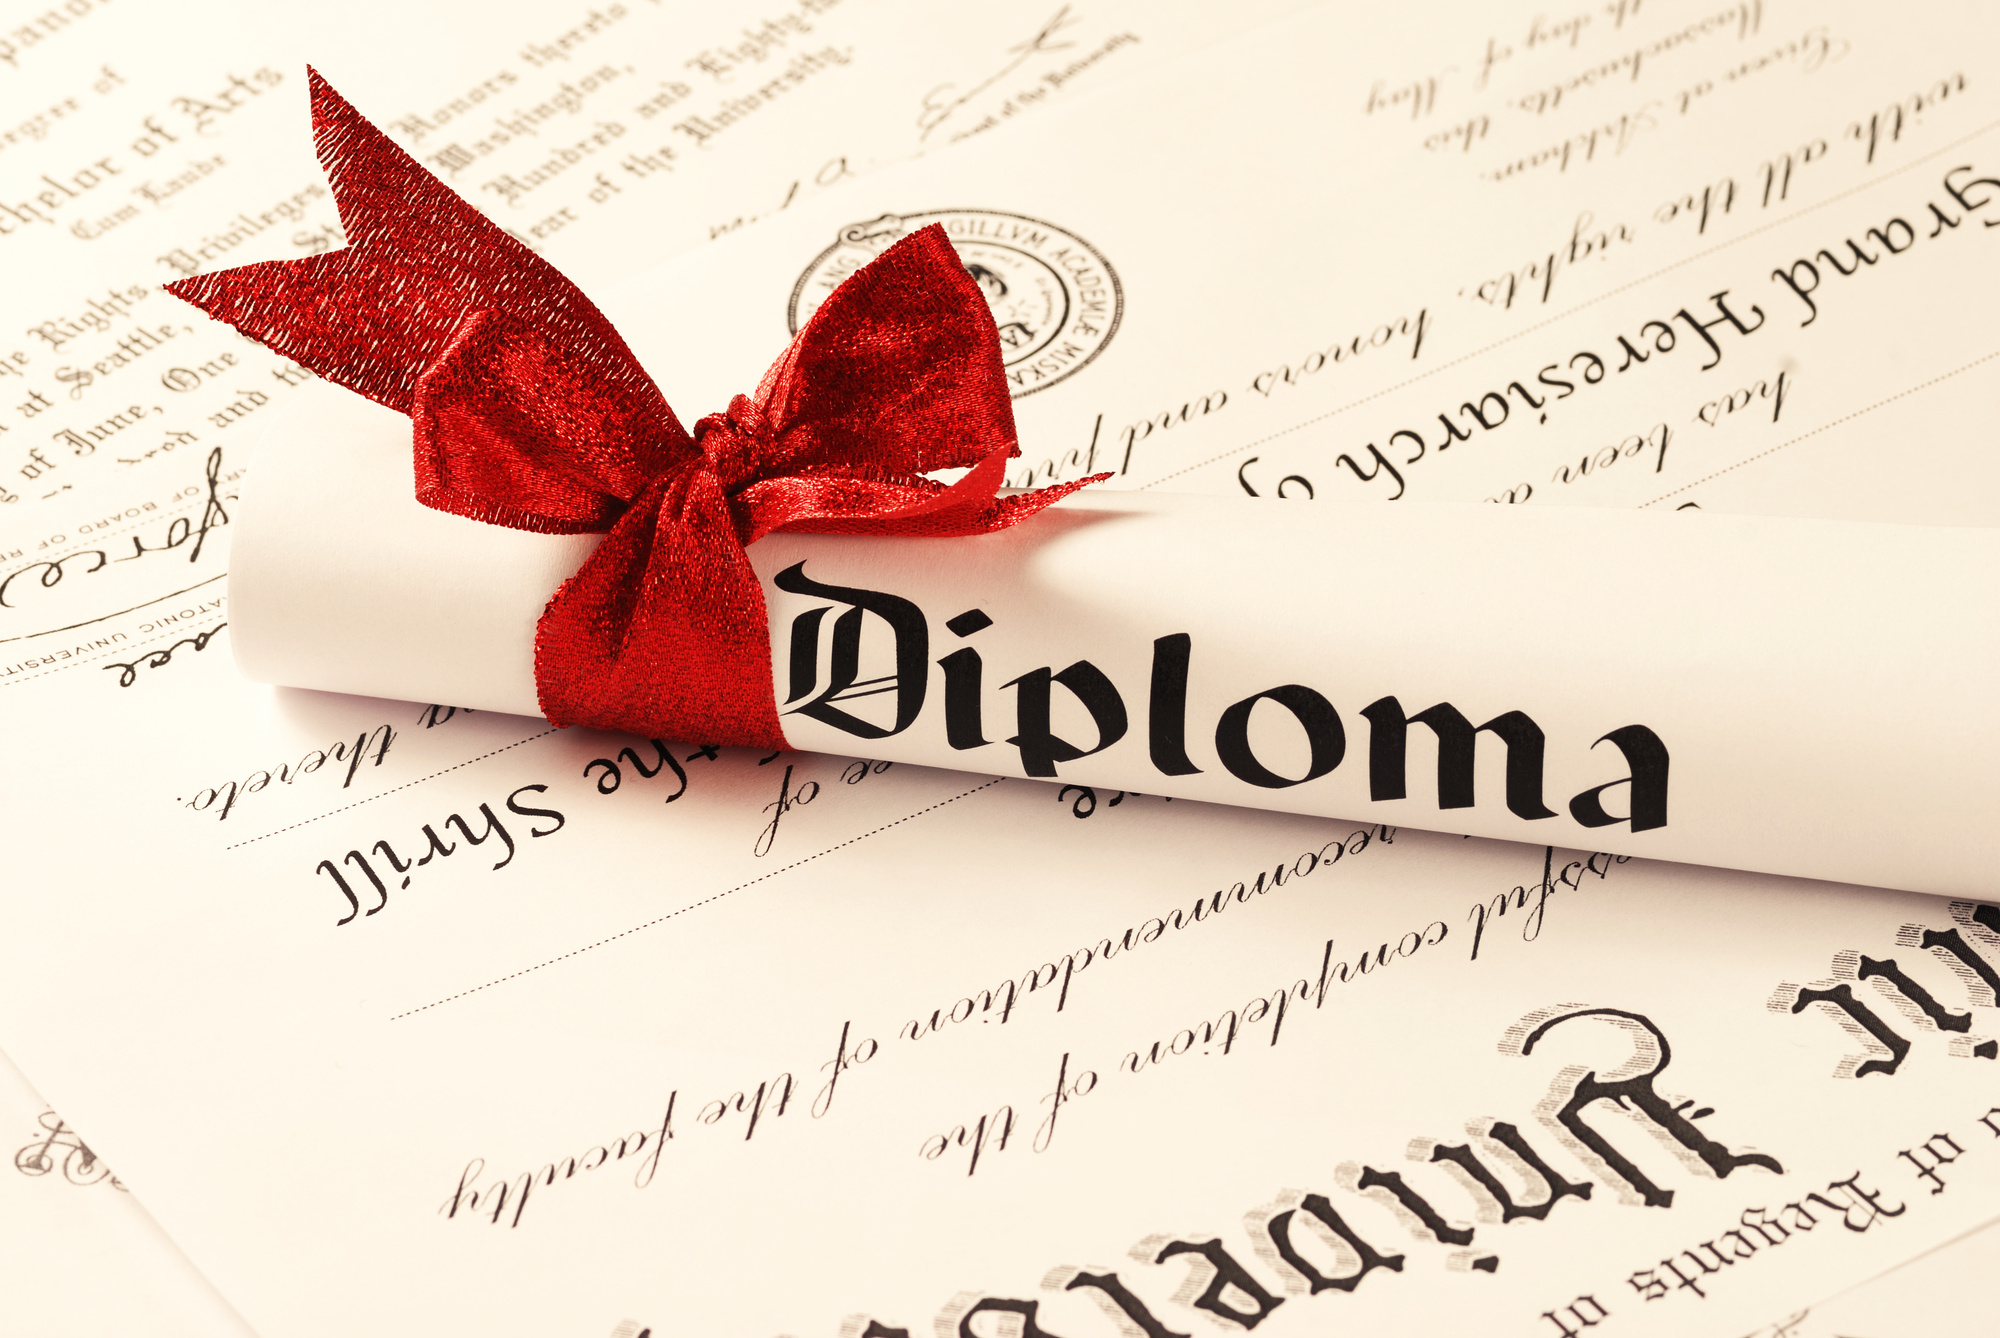 How to Be Smart When Buying Fake Diplomas